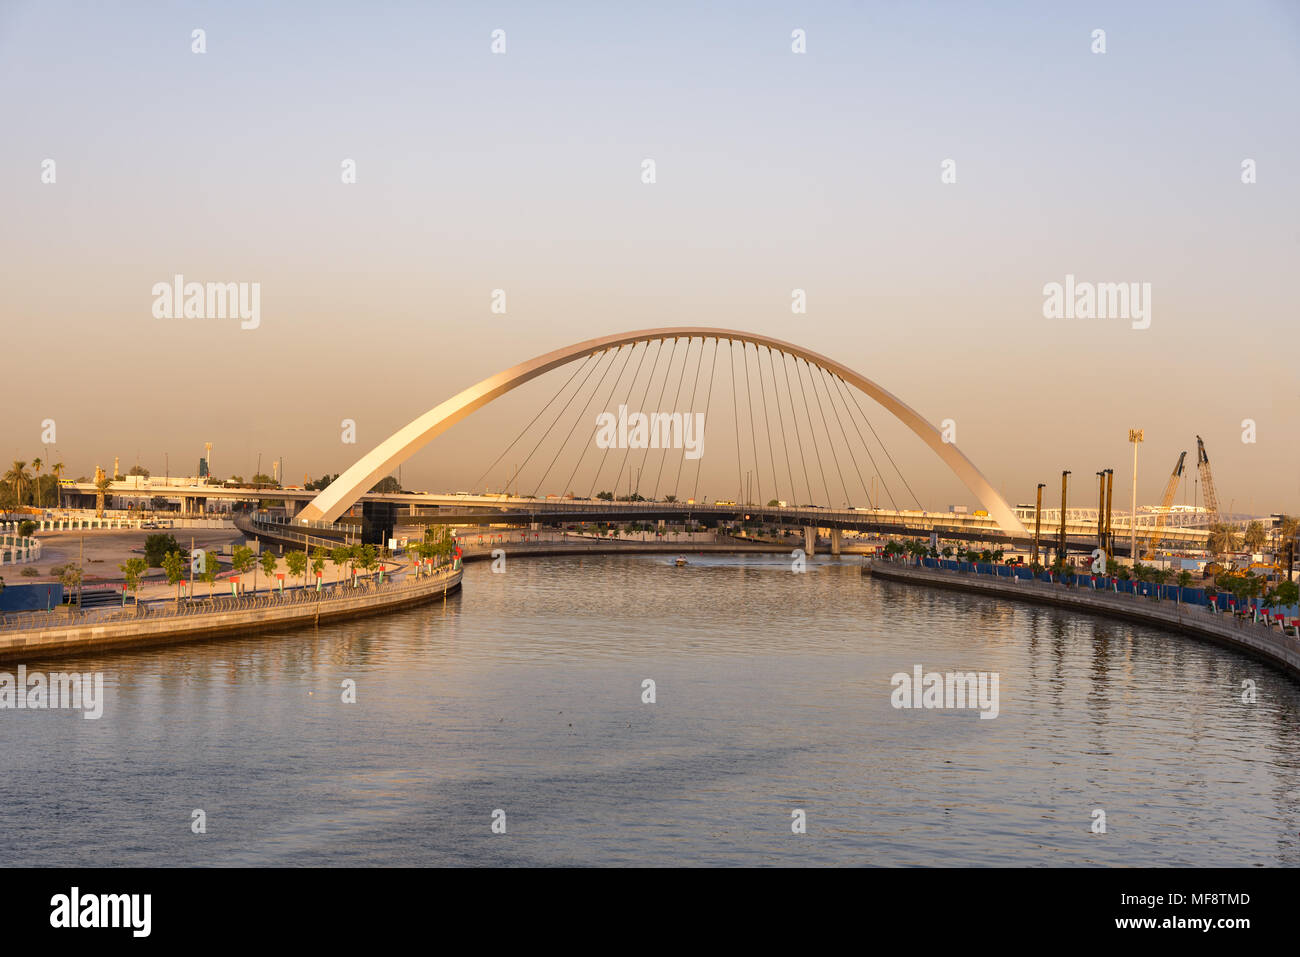 The footbridge view over the new Dubai Water Canal at sunset Stock Photo